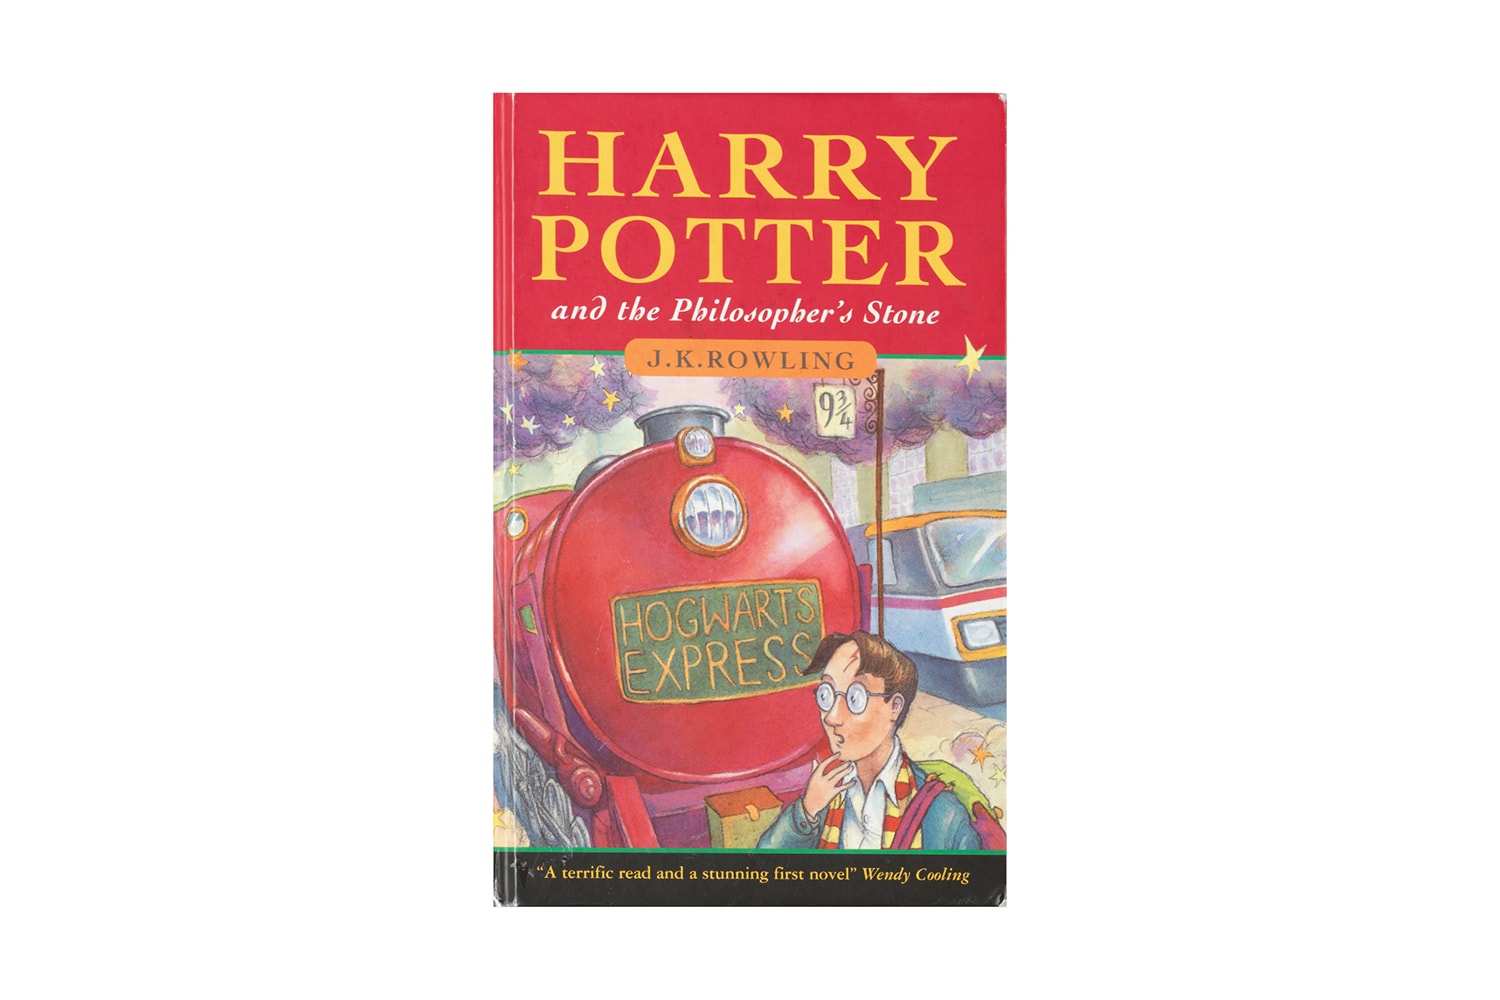 Harry Potter and the Philosopher's Stone First Edition £118,000 GBP Auction Rowling J.K. Rowling Wizards Hogwarts Bryony Evens Christopher Little auctions Bonhams 